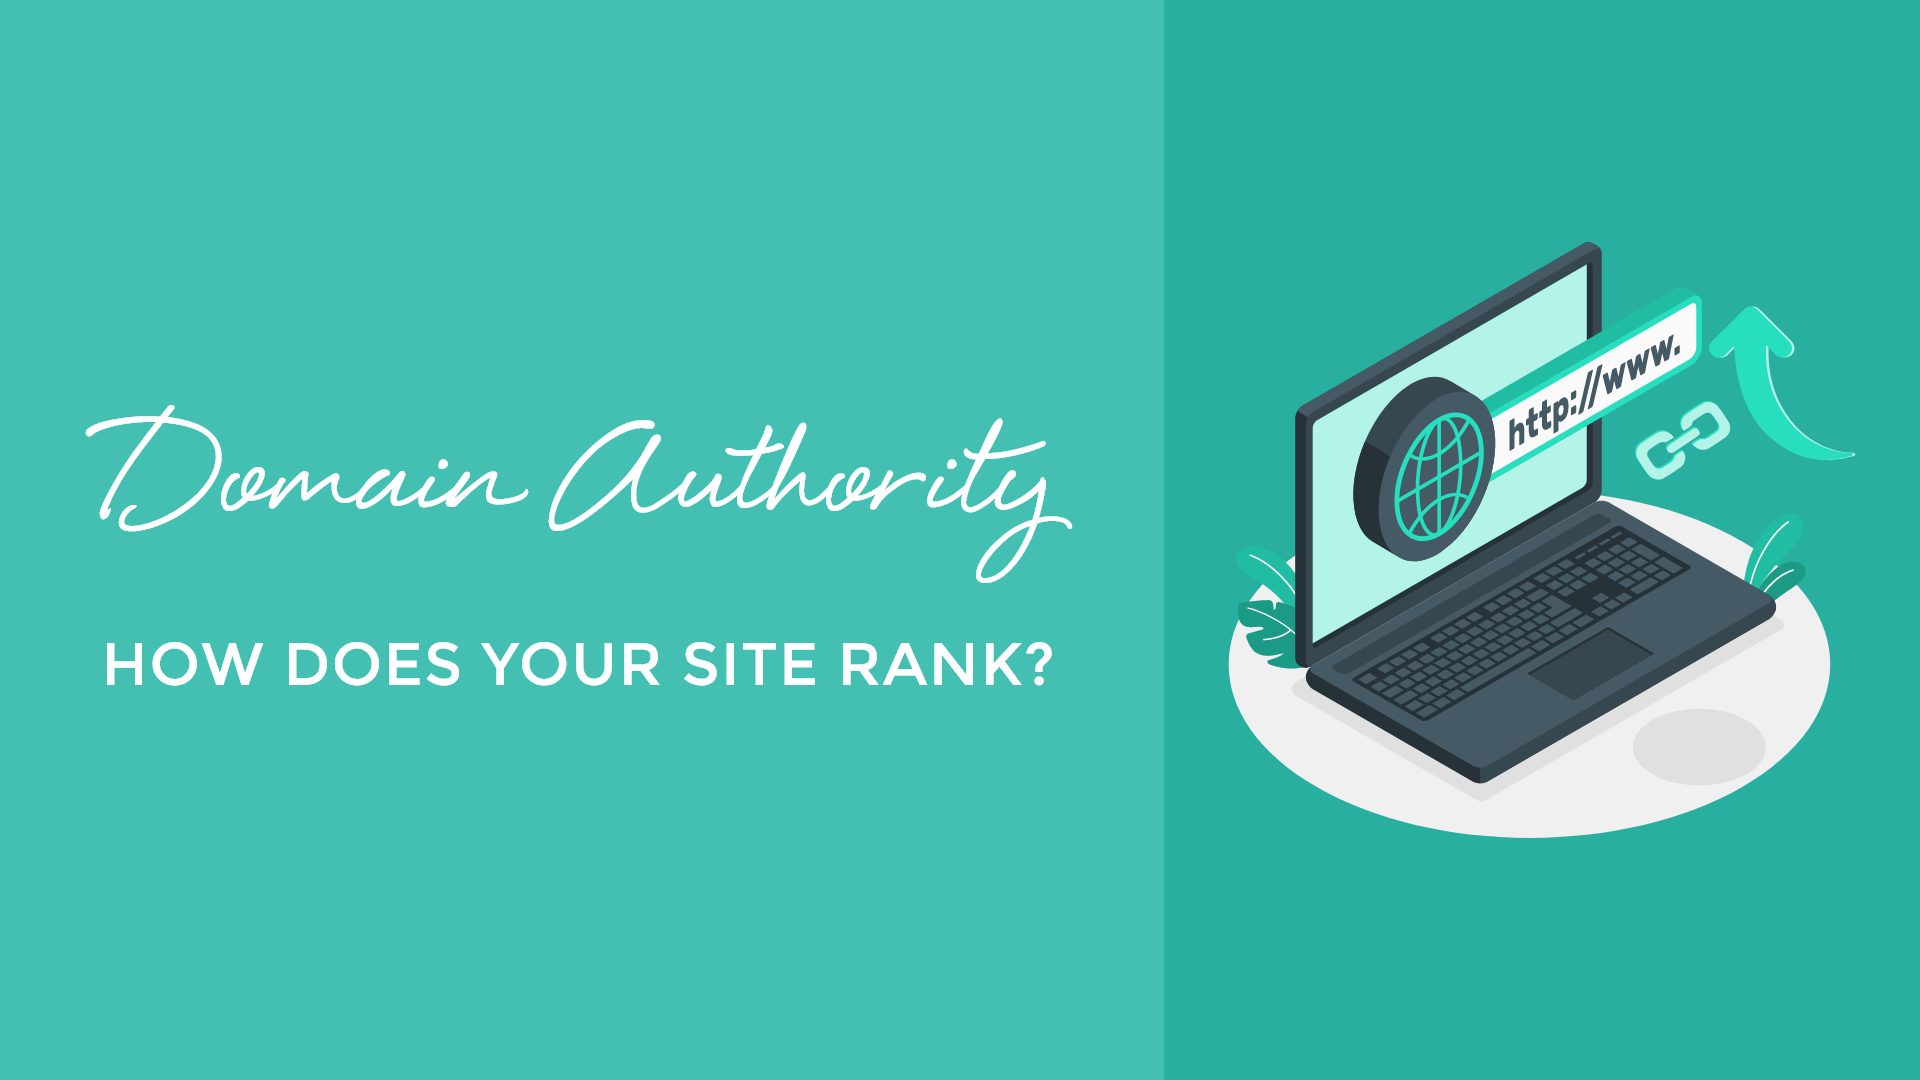 Domain Authority - How Does Your Site Rank?